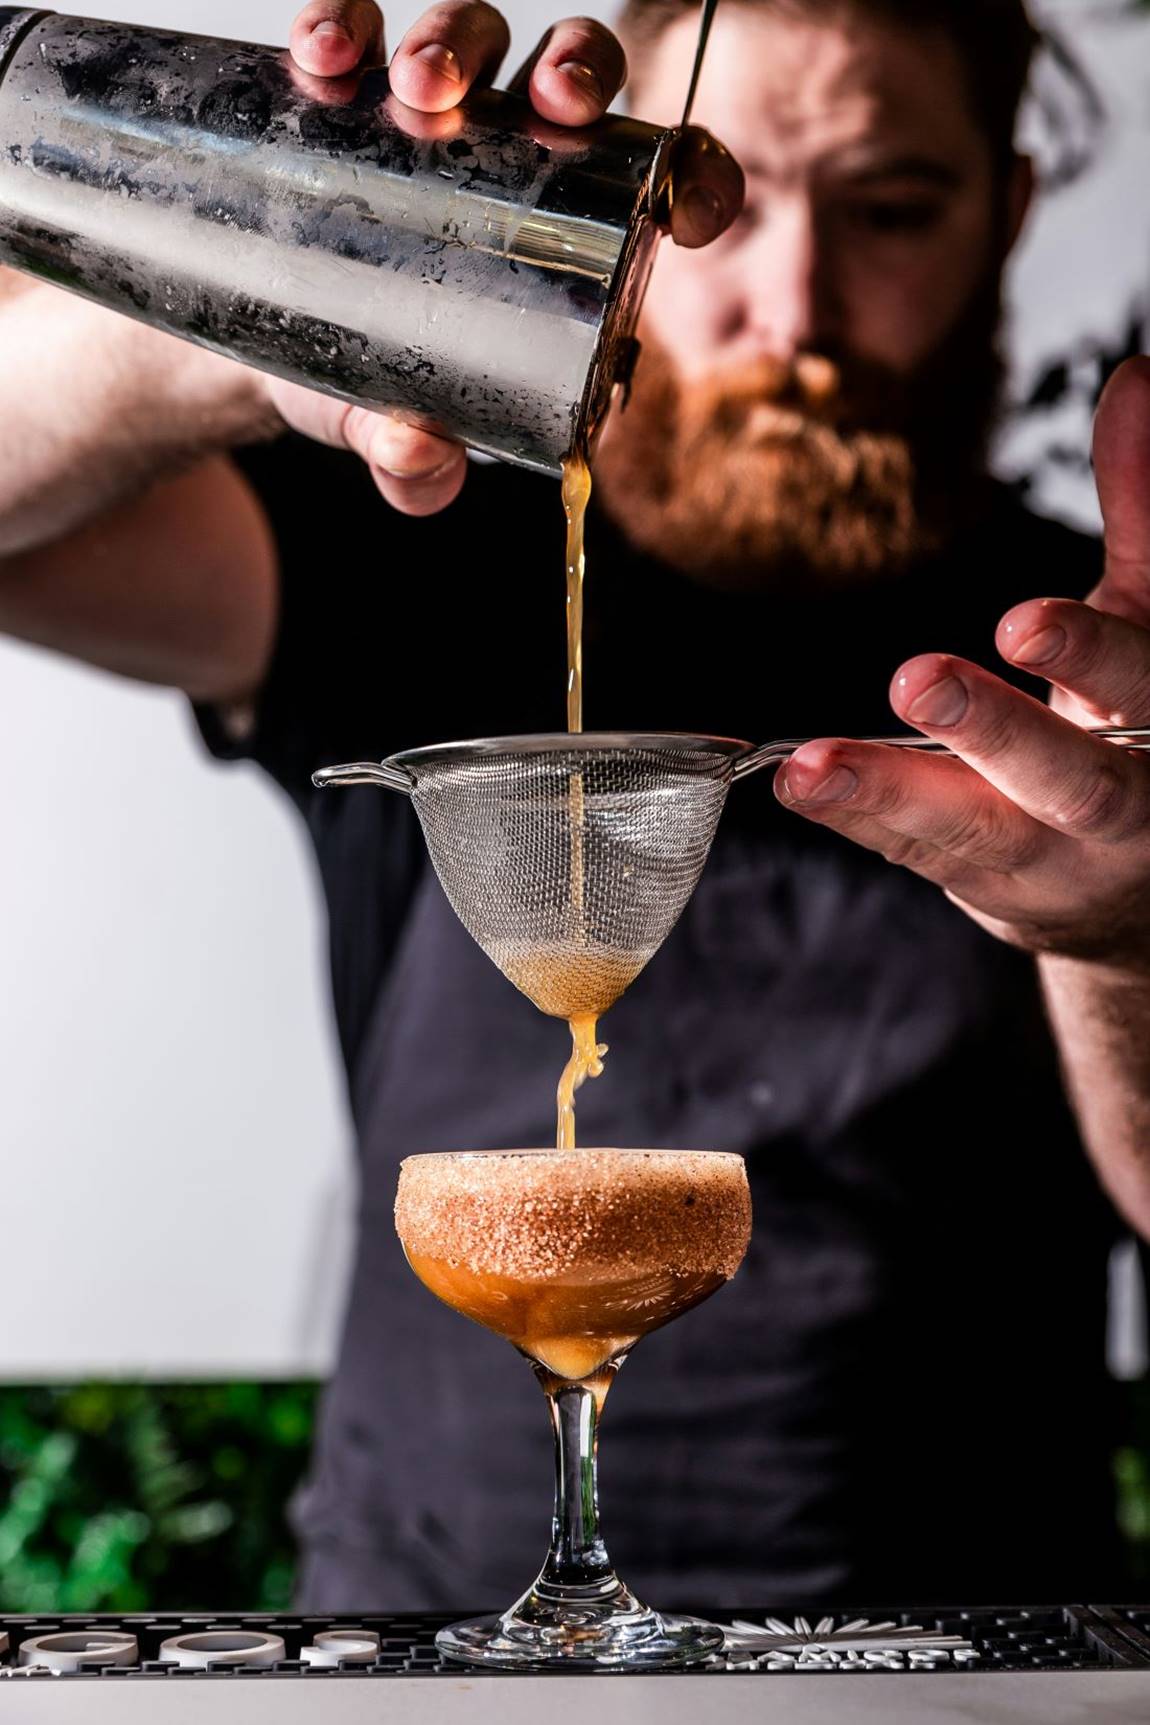 Smashing your Socials: Bartending in the Digital Age with Angostura